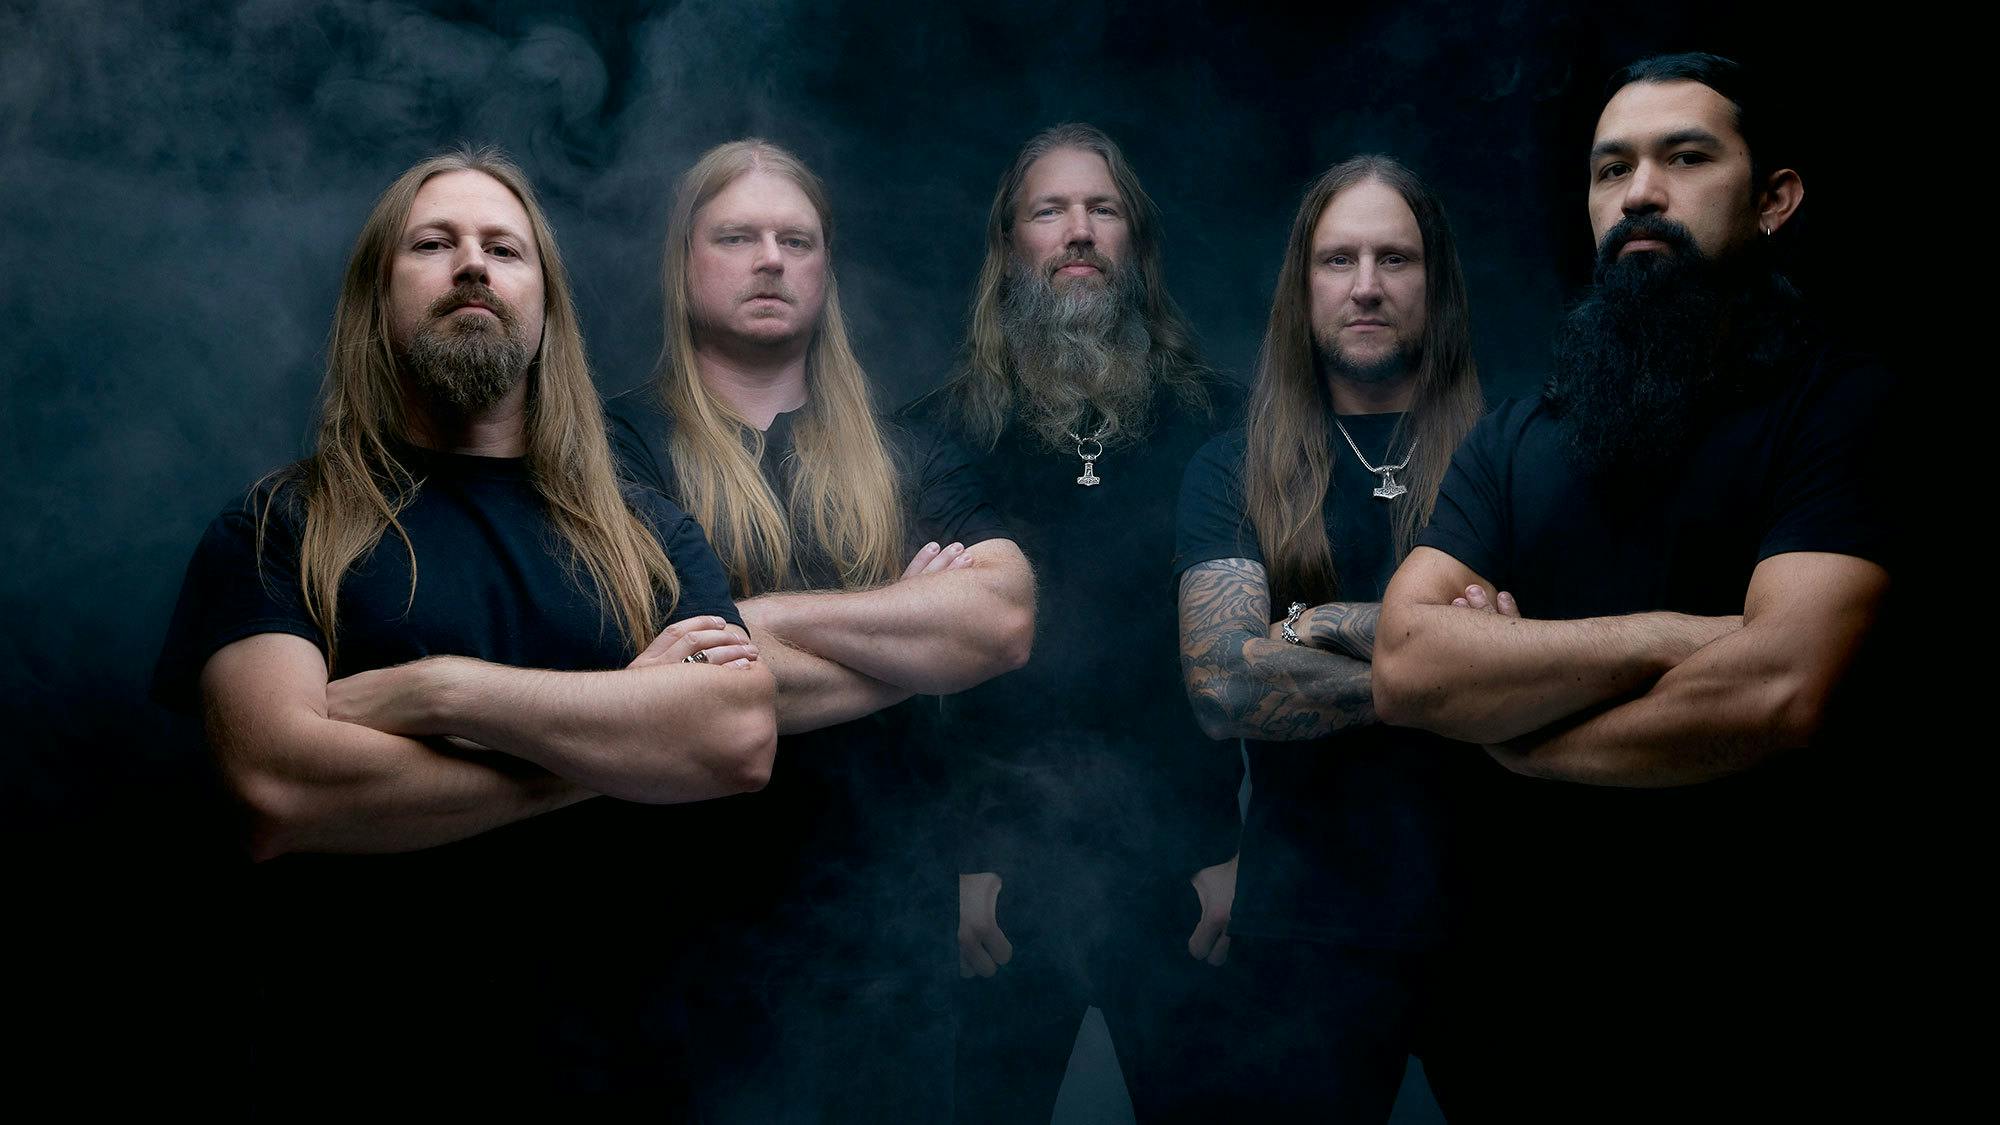 Amon Amarth, Arch Enemy, and At The Gates Announce North American Tour